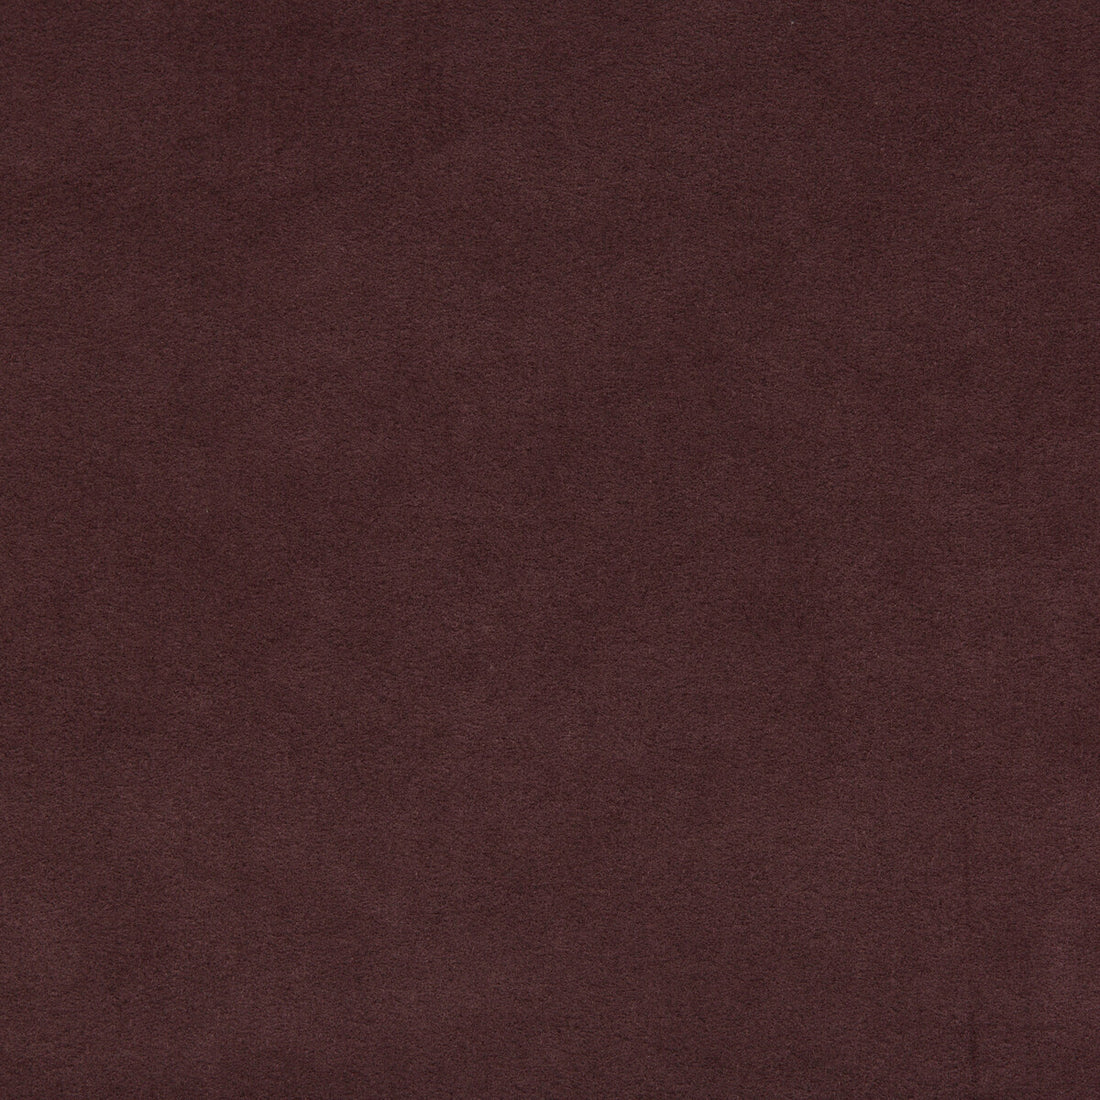 Ultrasuede Green fabric in berry color - pattern 30787.10.0 - by Kravet Design in the Performance collection